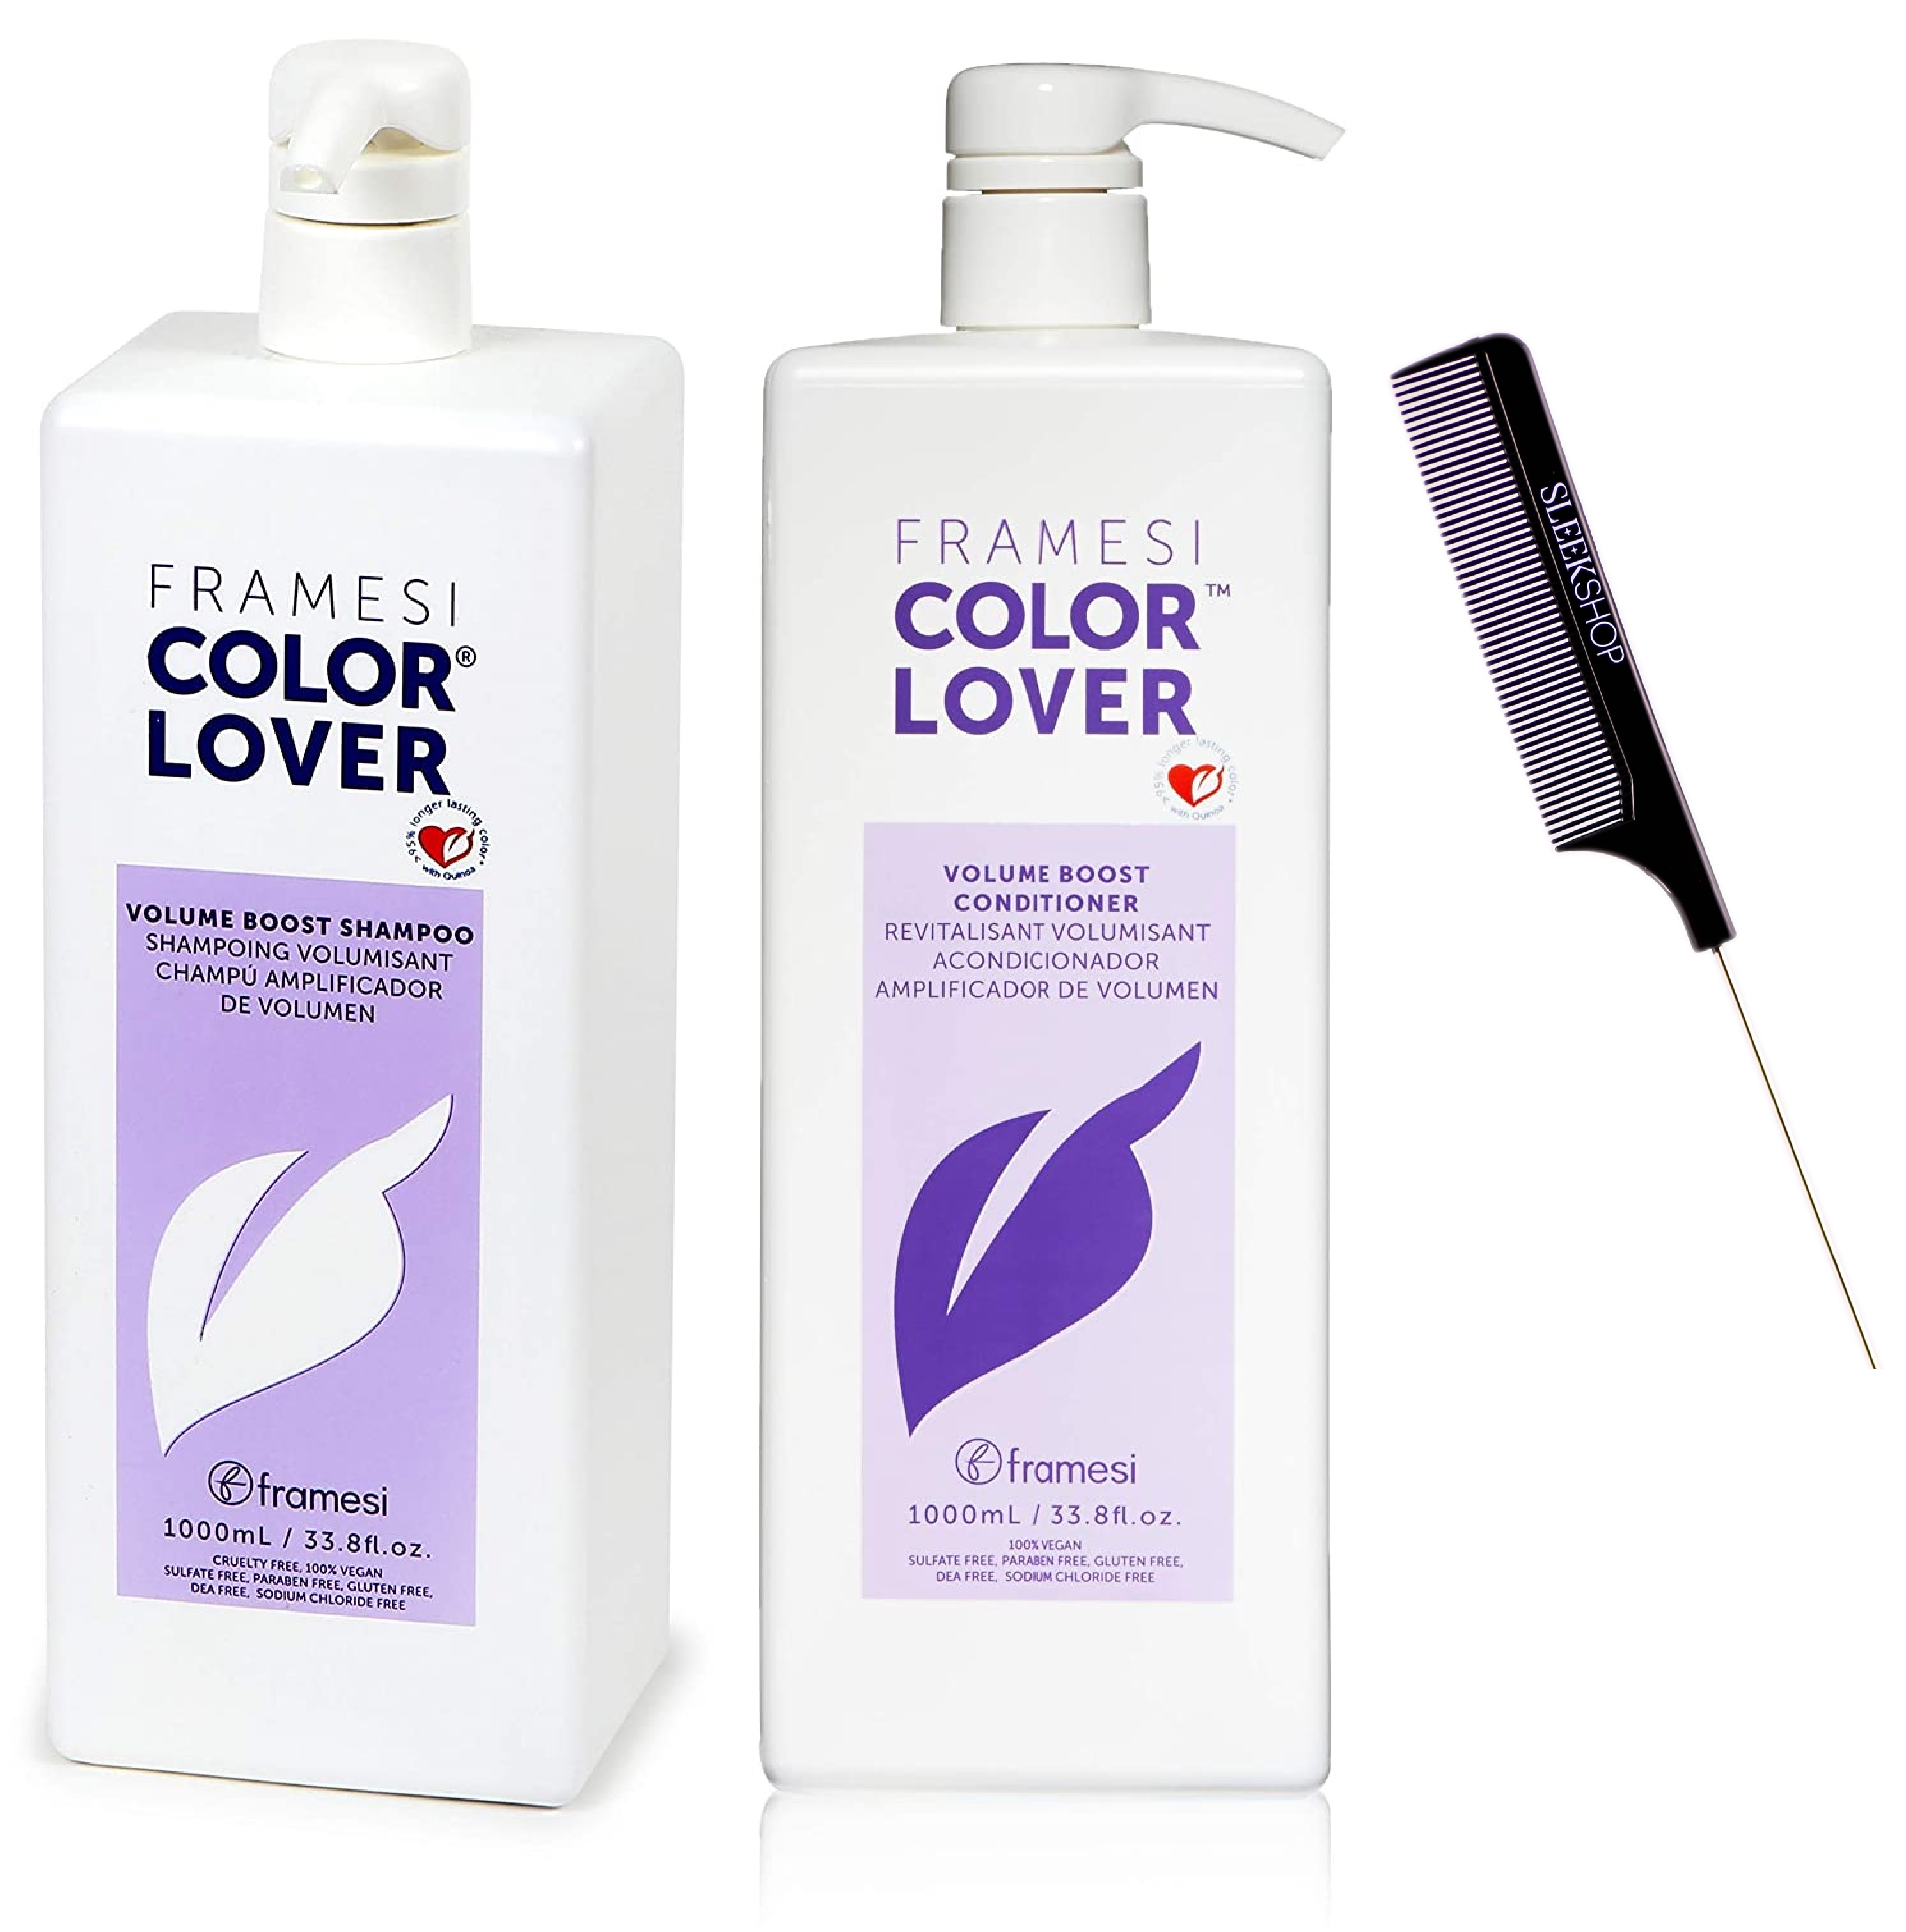 Framesi COLOR LOVER Volume Boost Shampoo & Conditioner DUO SET (w/ Sleek Comb) Sulfate-Free, Volumizing to Lift Hair (33.8 oz + 33.8 oz - LARGE LITER KIT) - image 1 of 1